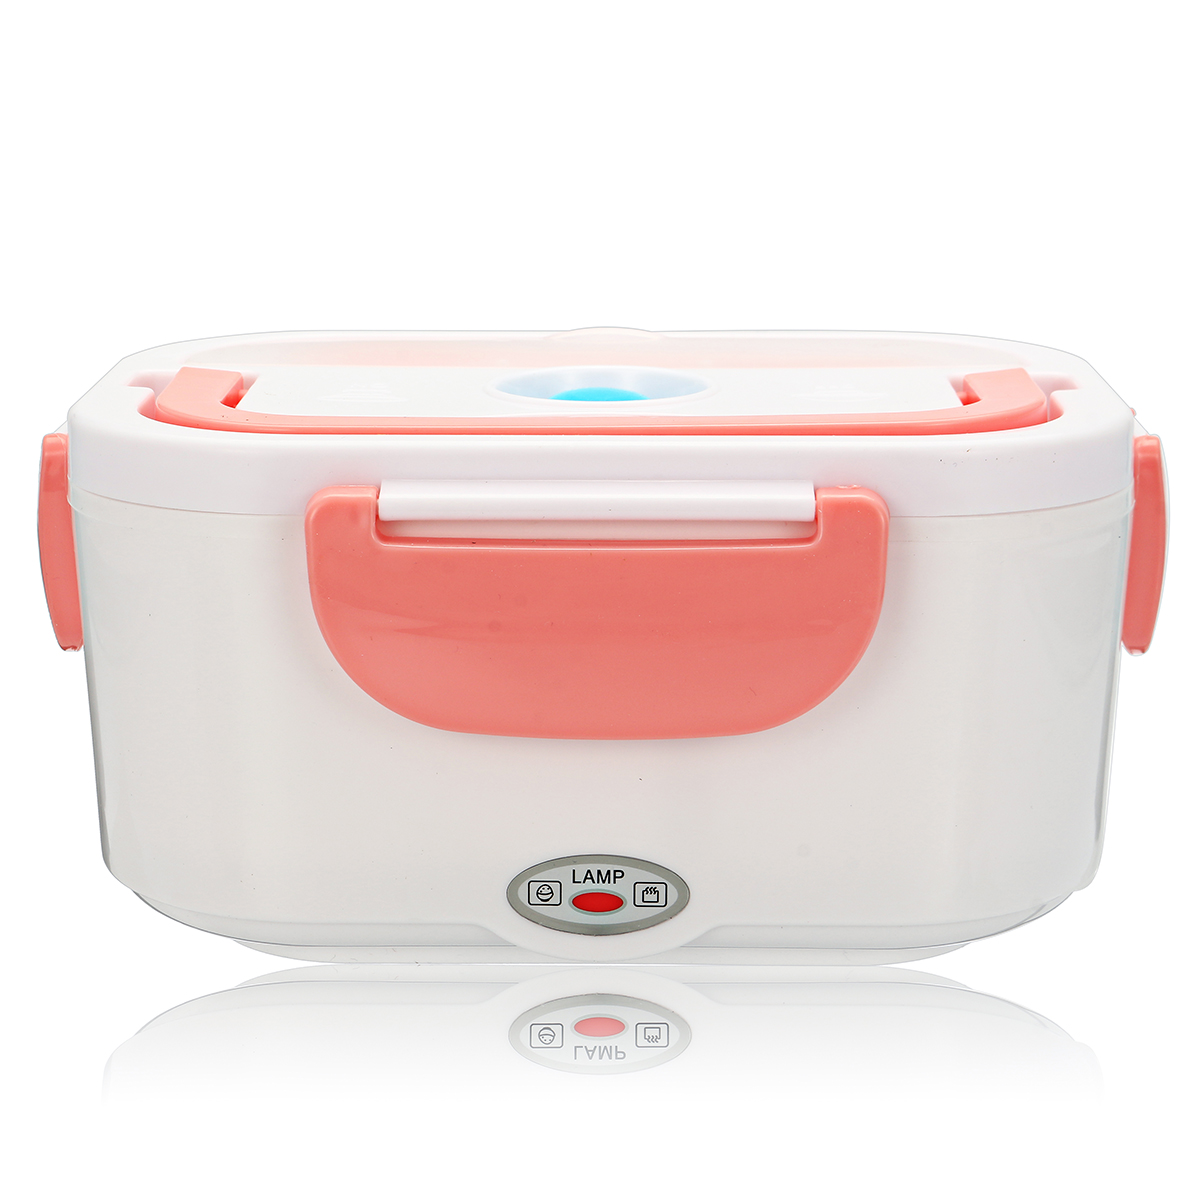 110V-Portable-Electric-Lunch-Box-Steamer-Rice-Cooker-Container-Heat-Preservation-1400151-3